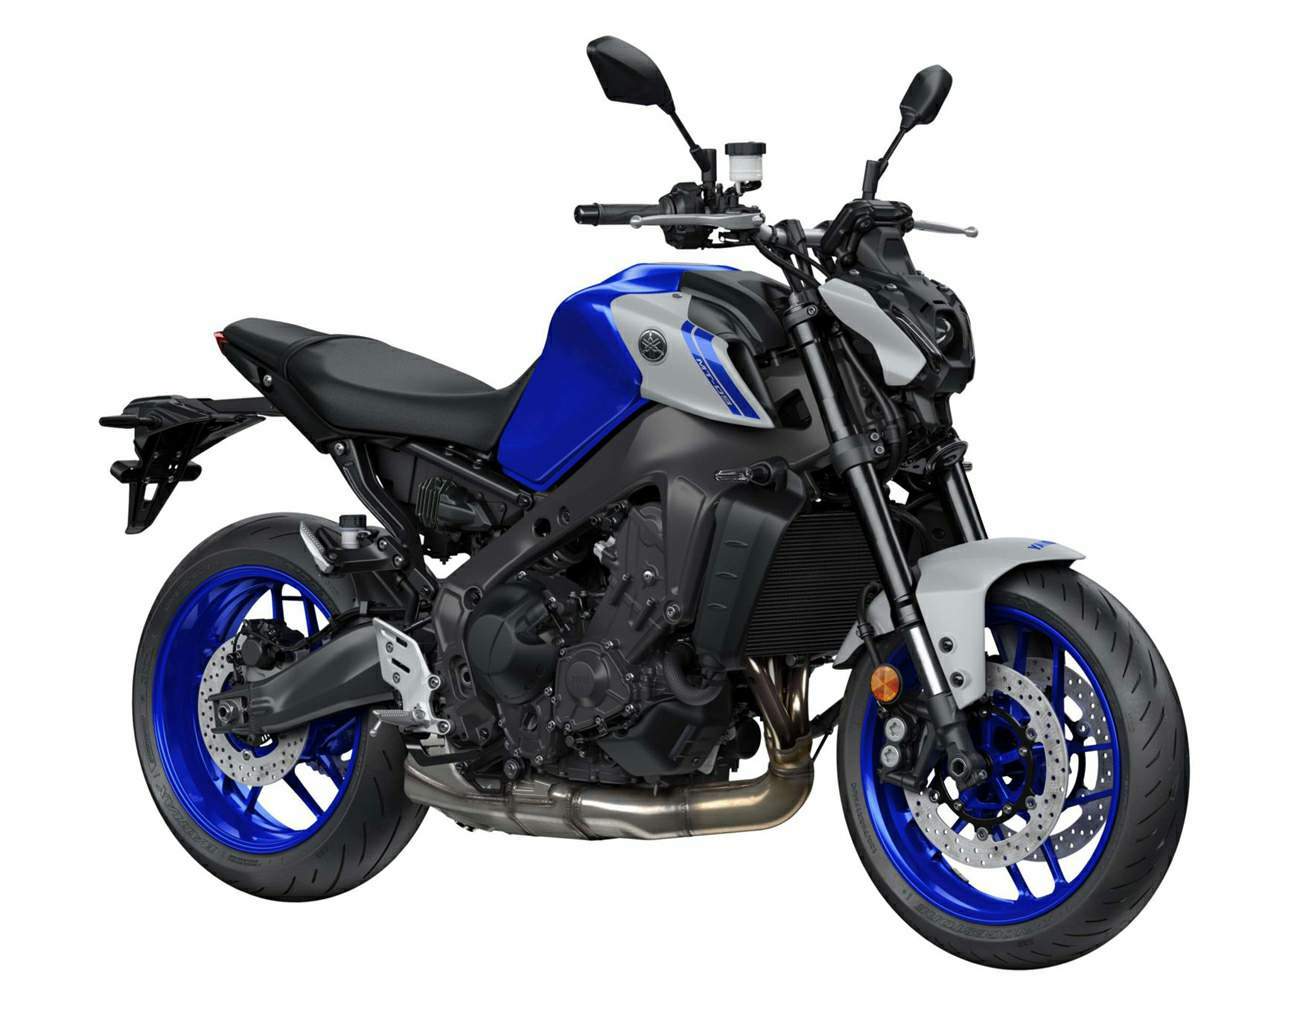 Yamaha MT 09 2021 Technical Specifications